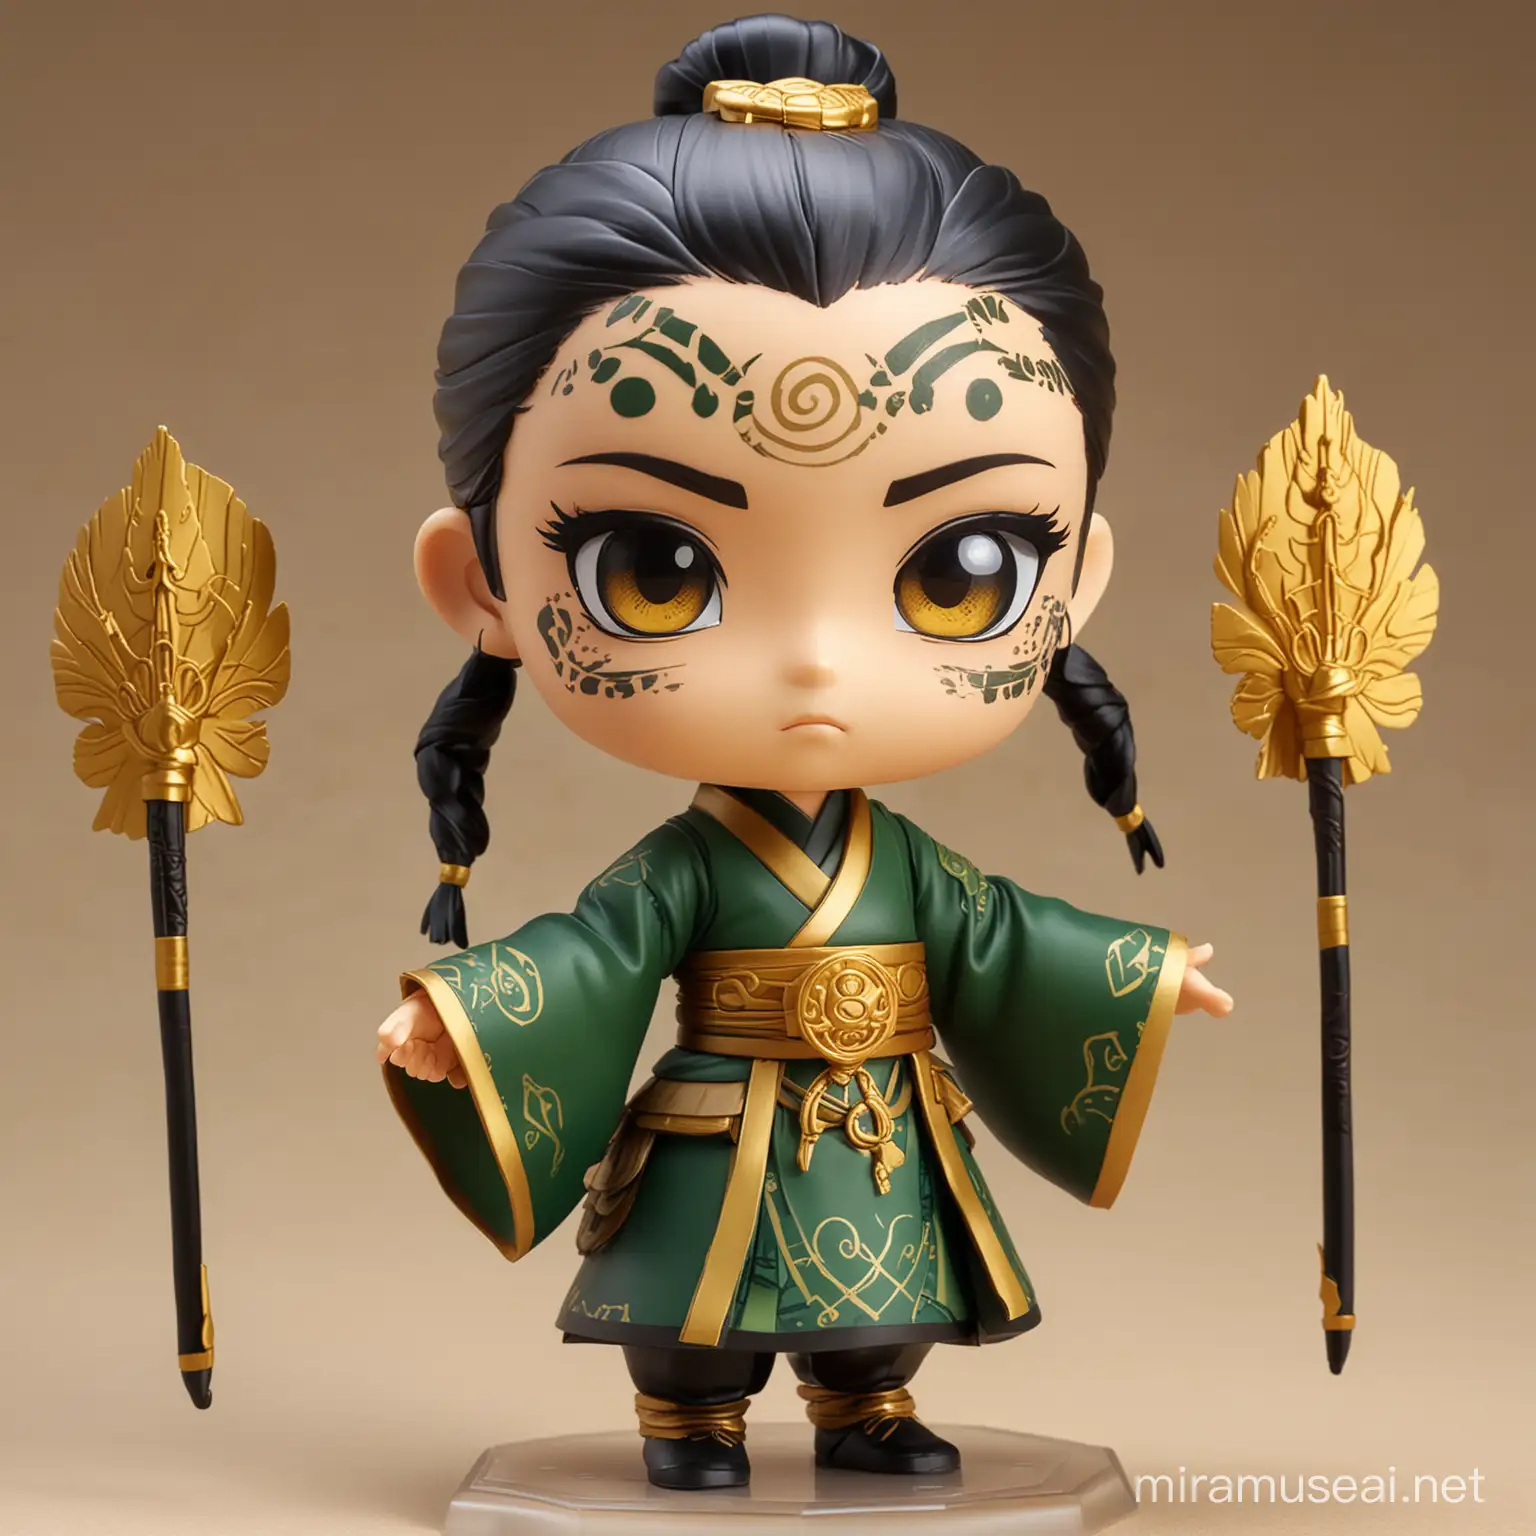 "Generate a chibi-style Nendoroid illustration of Kyoshi from Avatar: The Last Airbender, featuring her iconic green and gold robes with intricate details, and face paint. Show her standing confidently with her two fans.